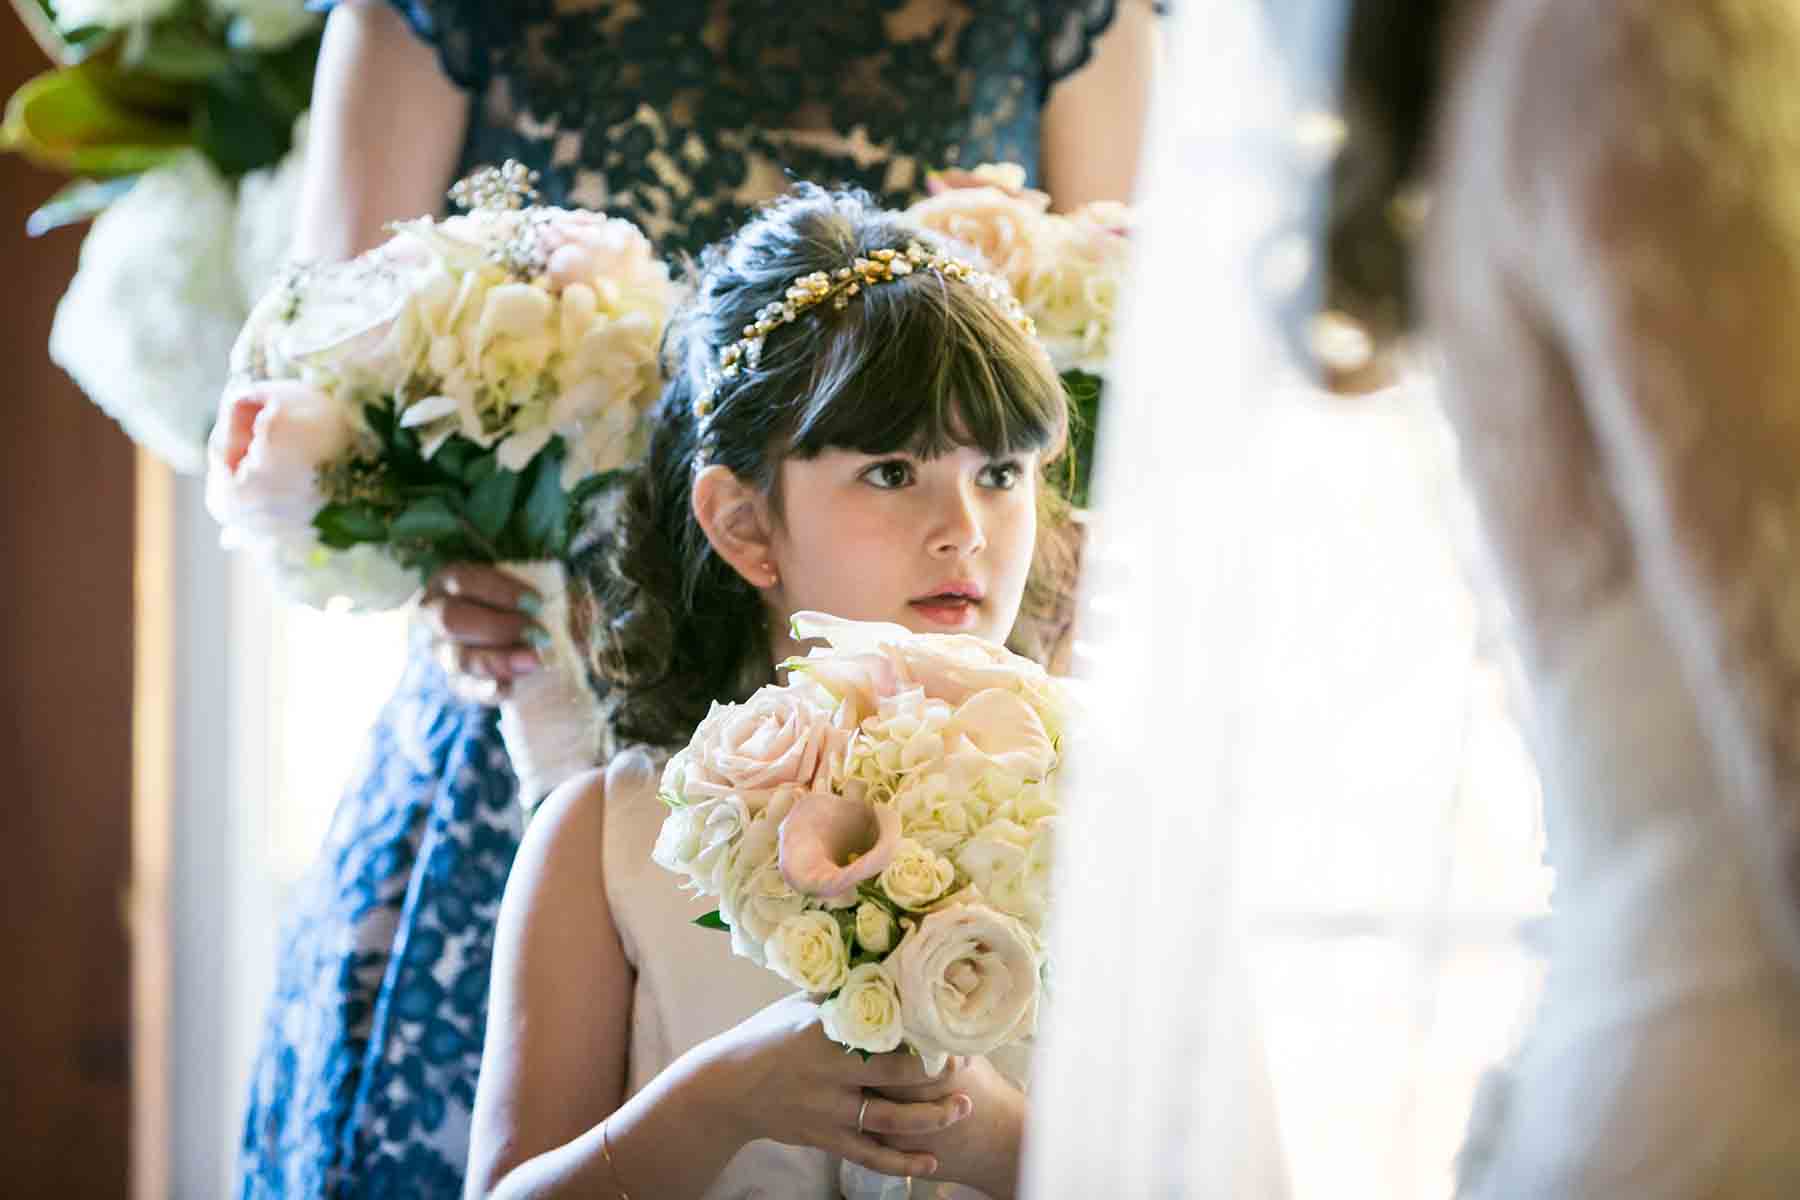 Little flower girl holding flower bouquet behind bride for an article on the best wedding jobs for family and friends